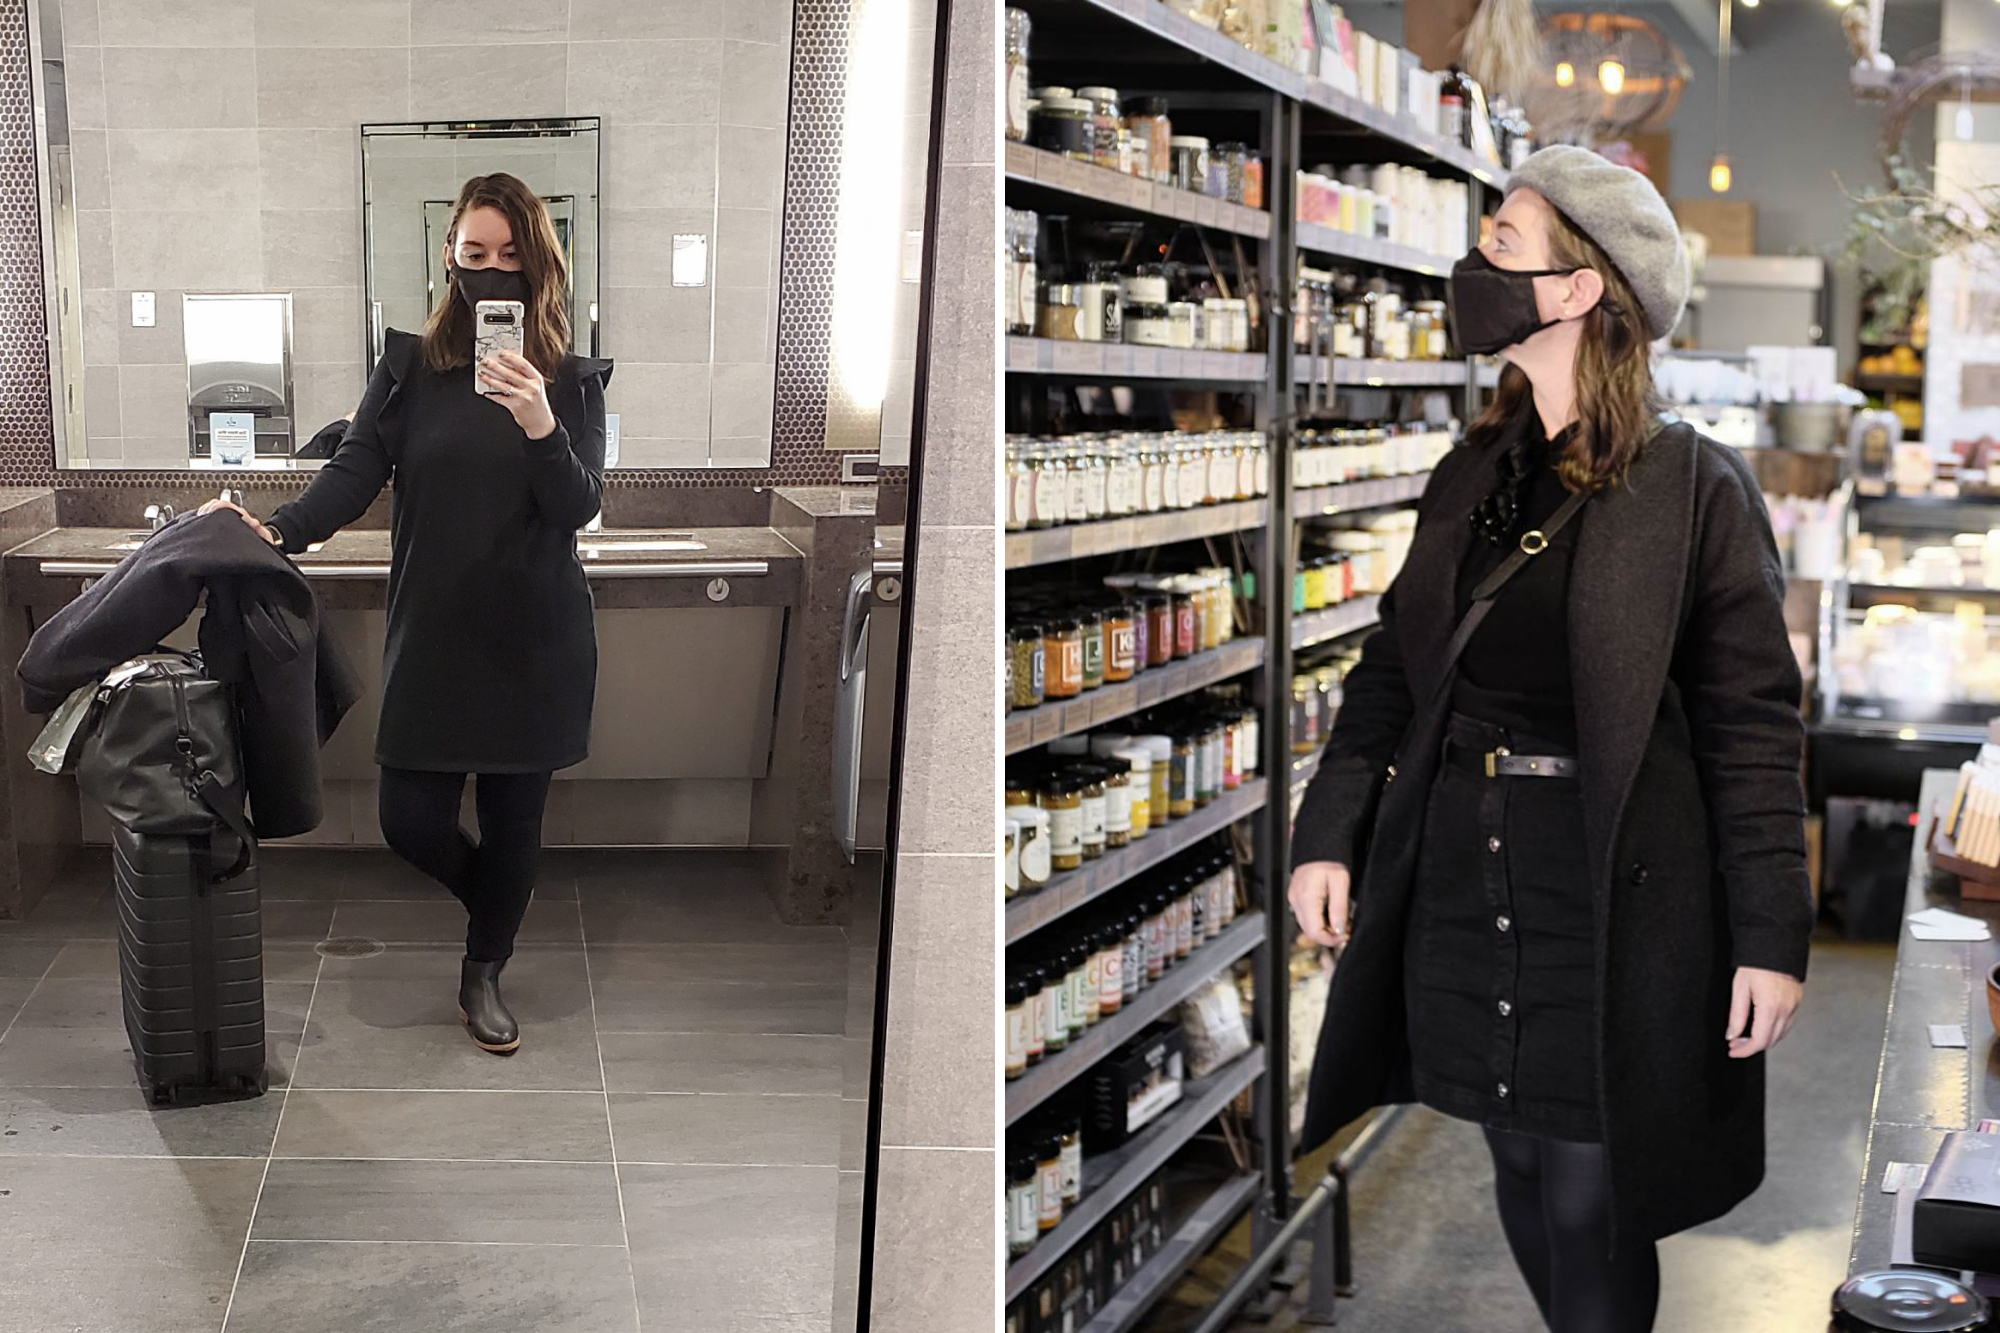 Two images. Image one: Alyssa in a large mirror with her suitcase at the airport. She is wearing a black dress with ruffles at the shoulders, black pants, and black boots. And a face mask. Image two: Alyssa in a shop, she is wearing a black turtleneck, black denim skirt, black belt, black tights, grey coat, and a grey beret